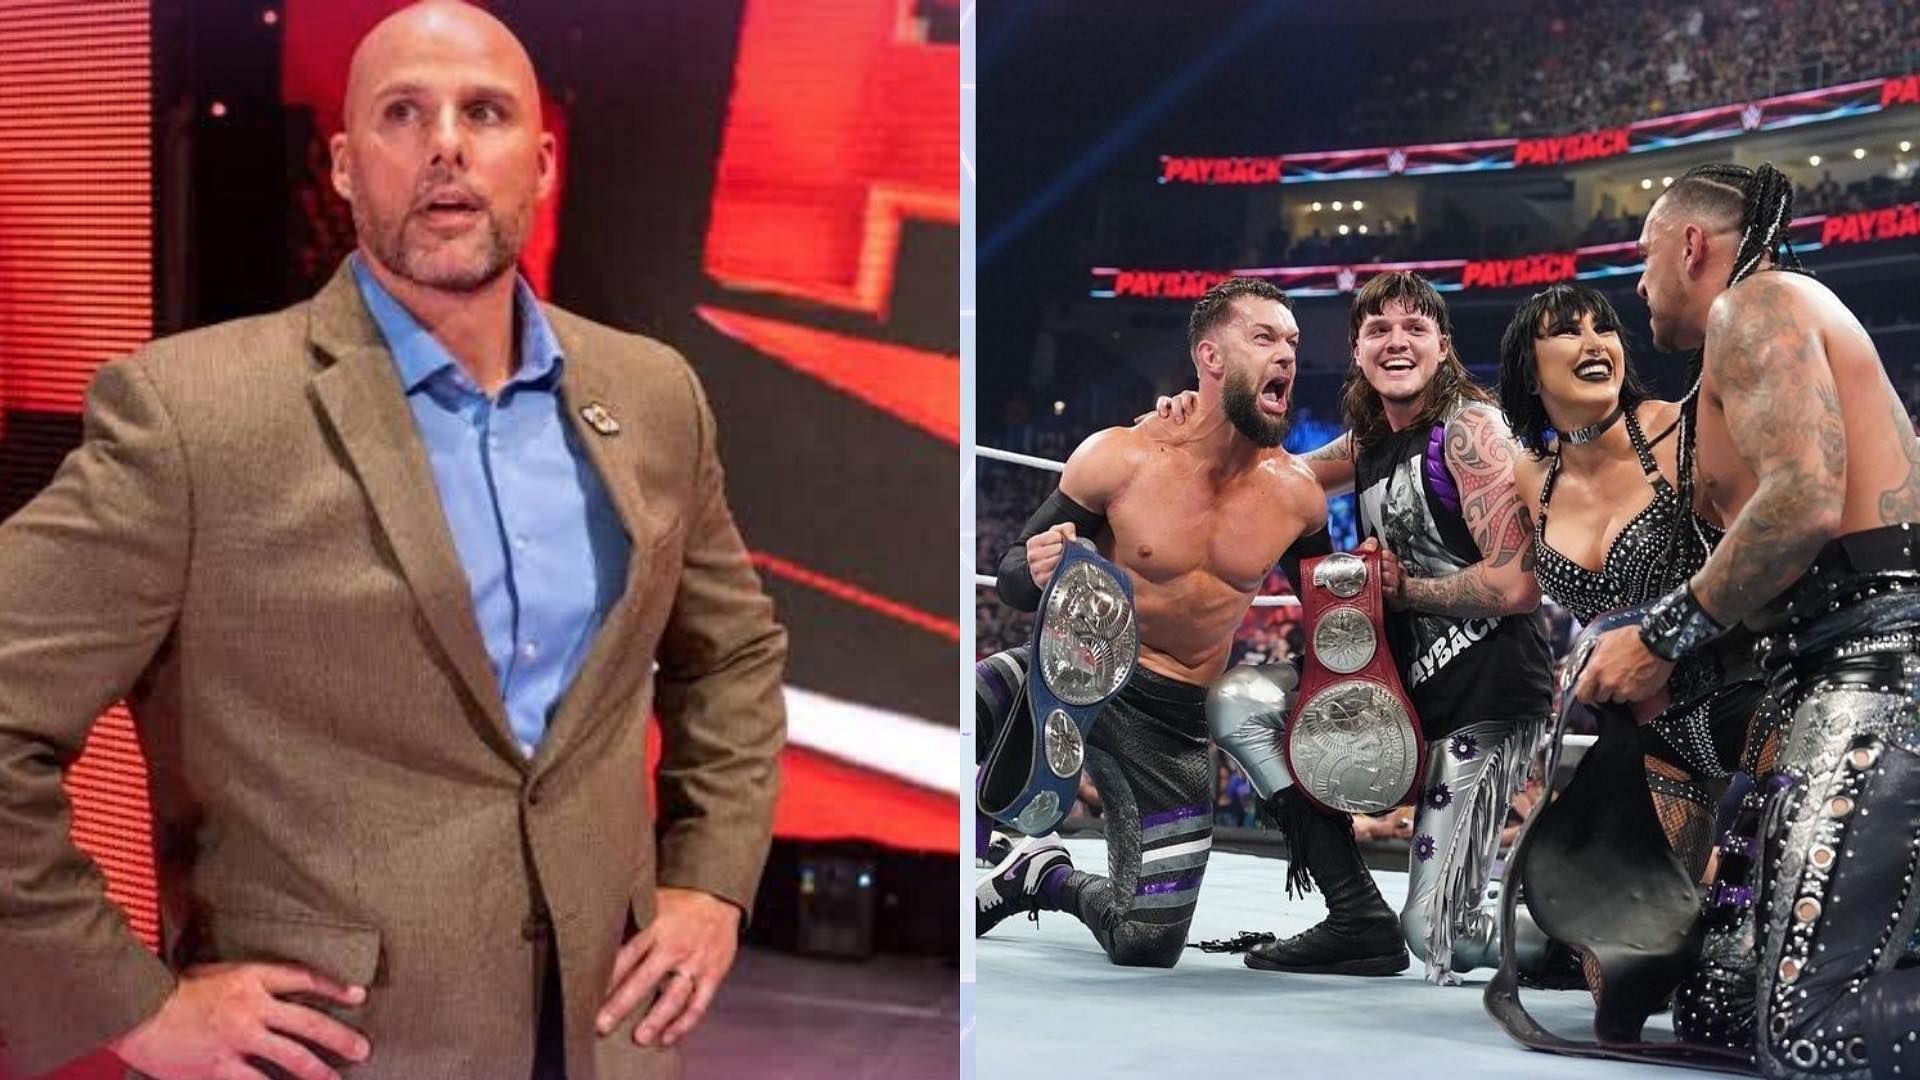 Adam Pearce is the new General Manager of WWE RAW